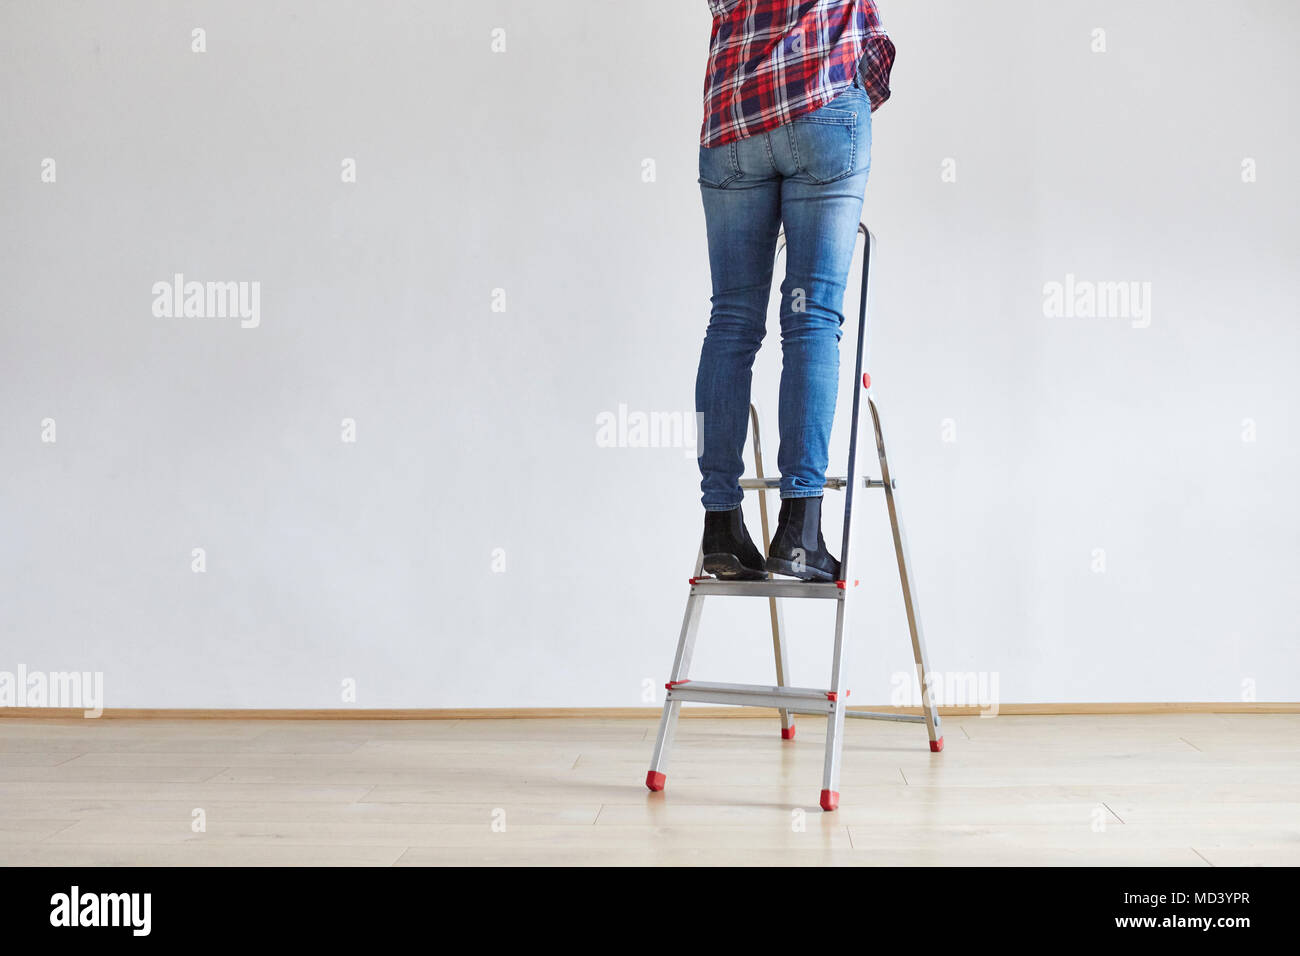 Person standing on ladder Stock Photo